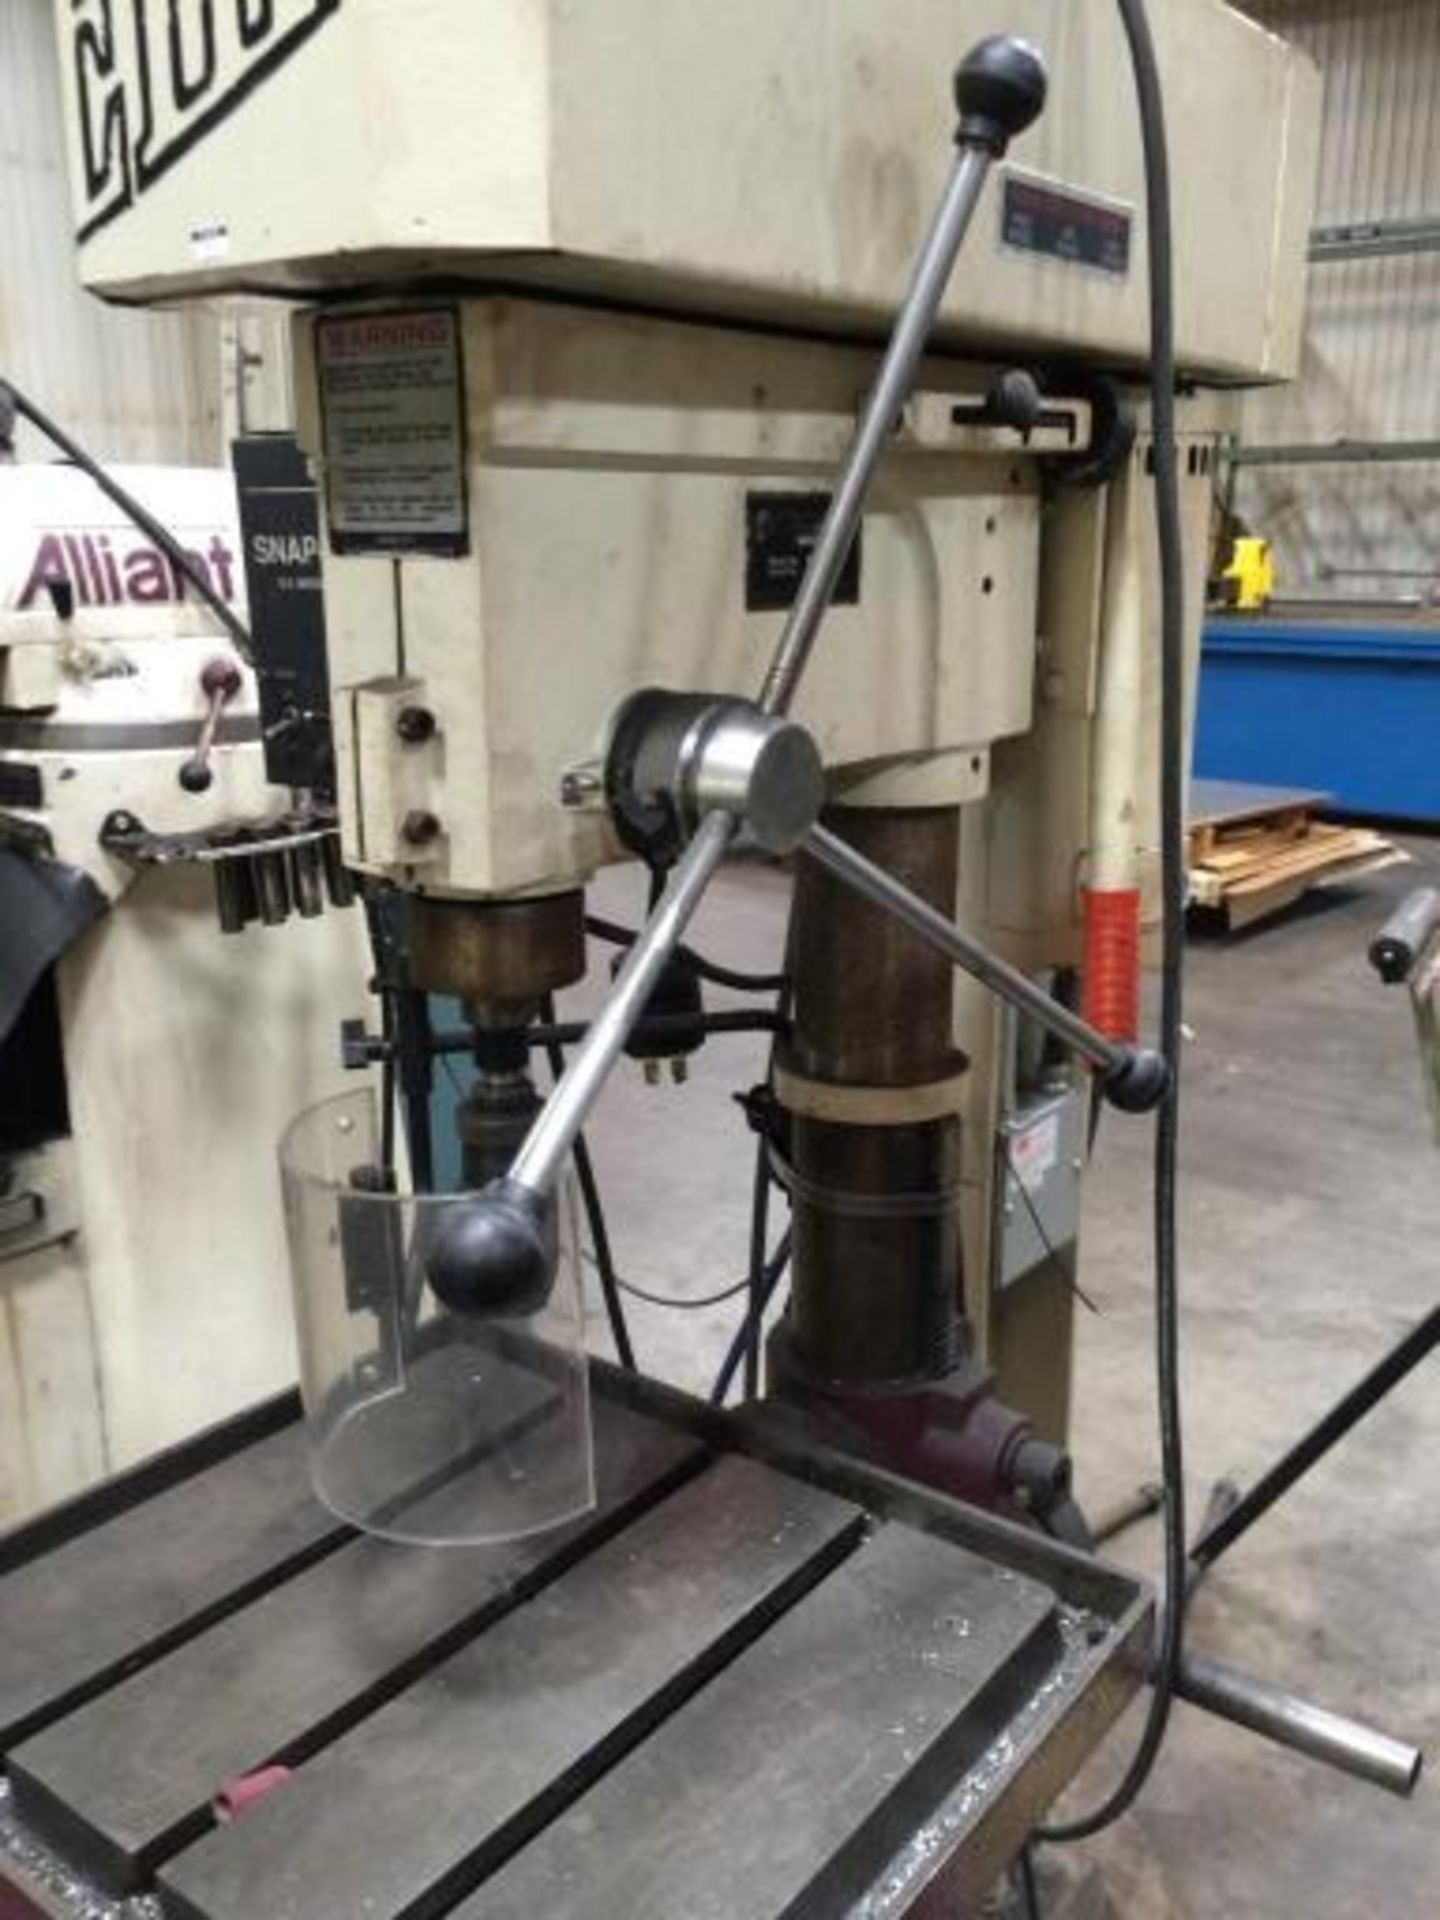 Model : 9000 ELLIS MODEL 9000 VARIABLE SPEED DRILL PRESS, 20" SPINDLE SPEEDS 0 - 1200 RPM DRILLS - Image 3 of 4